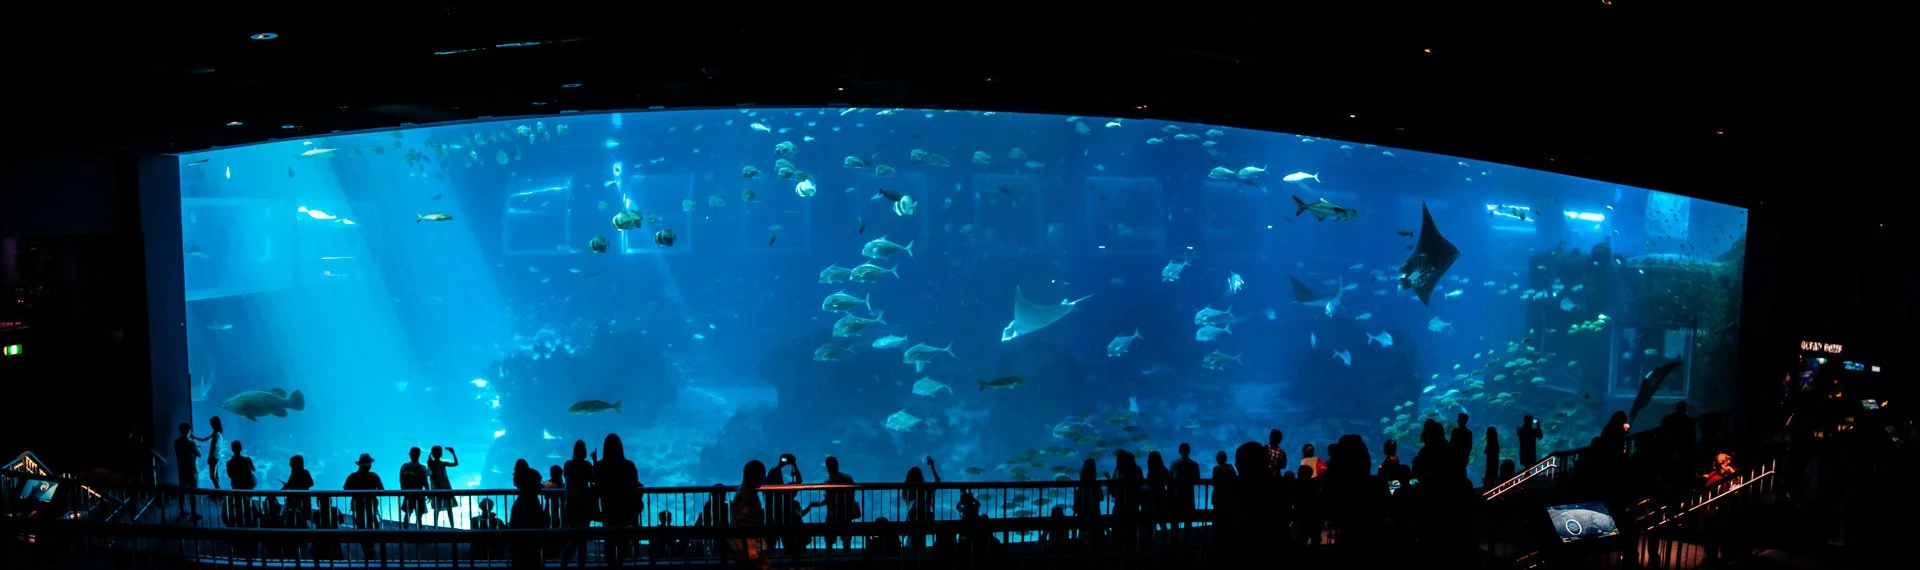 S.E.A. Aquarium: Discover the marvels of the various marine life in the oceans and how to preserve them